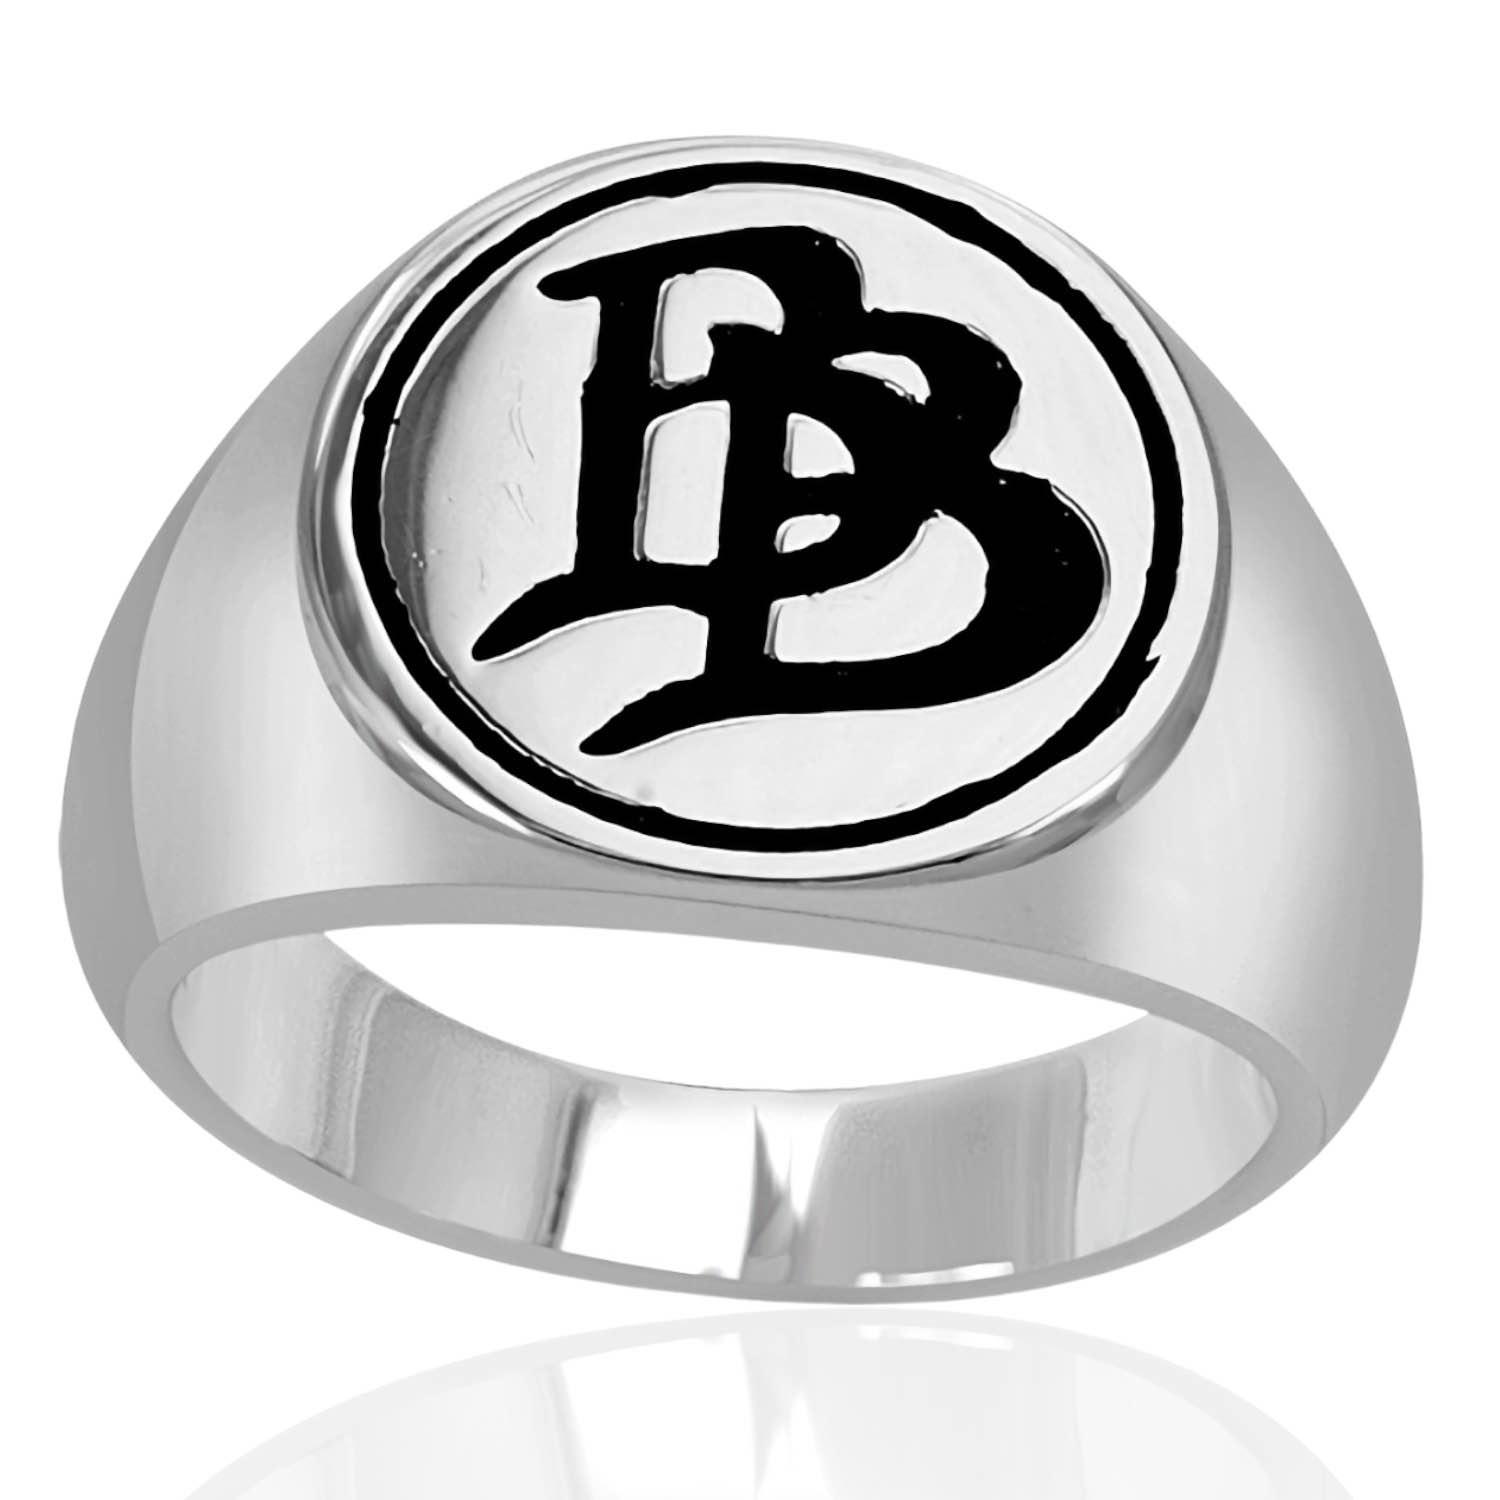 Get your own piece of Middle-earth with our hobbit-crafted Bilbo Baggins BB Signet Ring in sterling silver, complete with a leather pouch and authenticity card